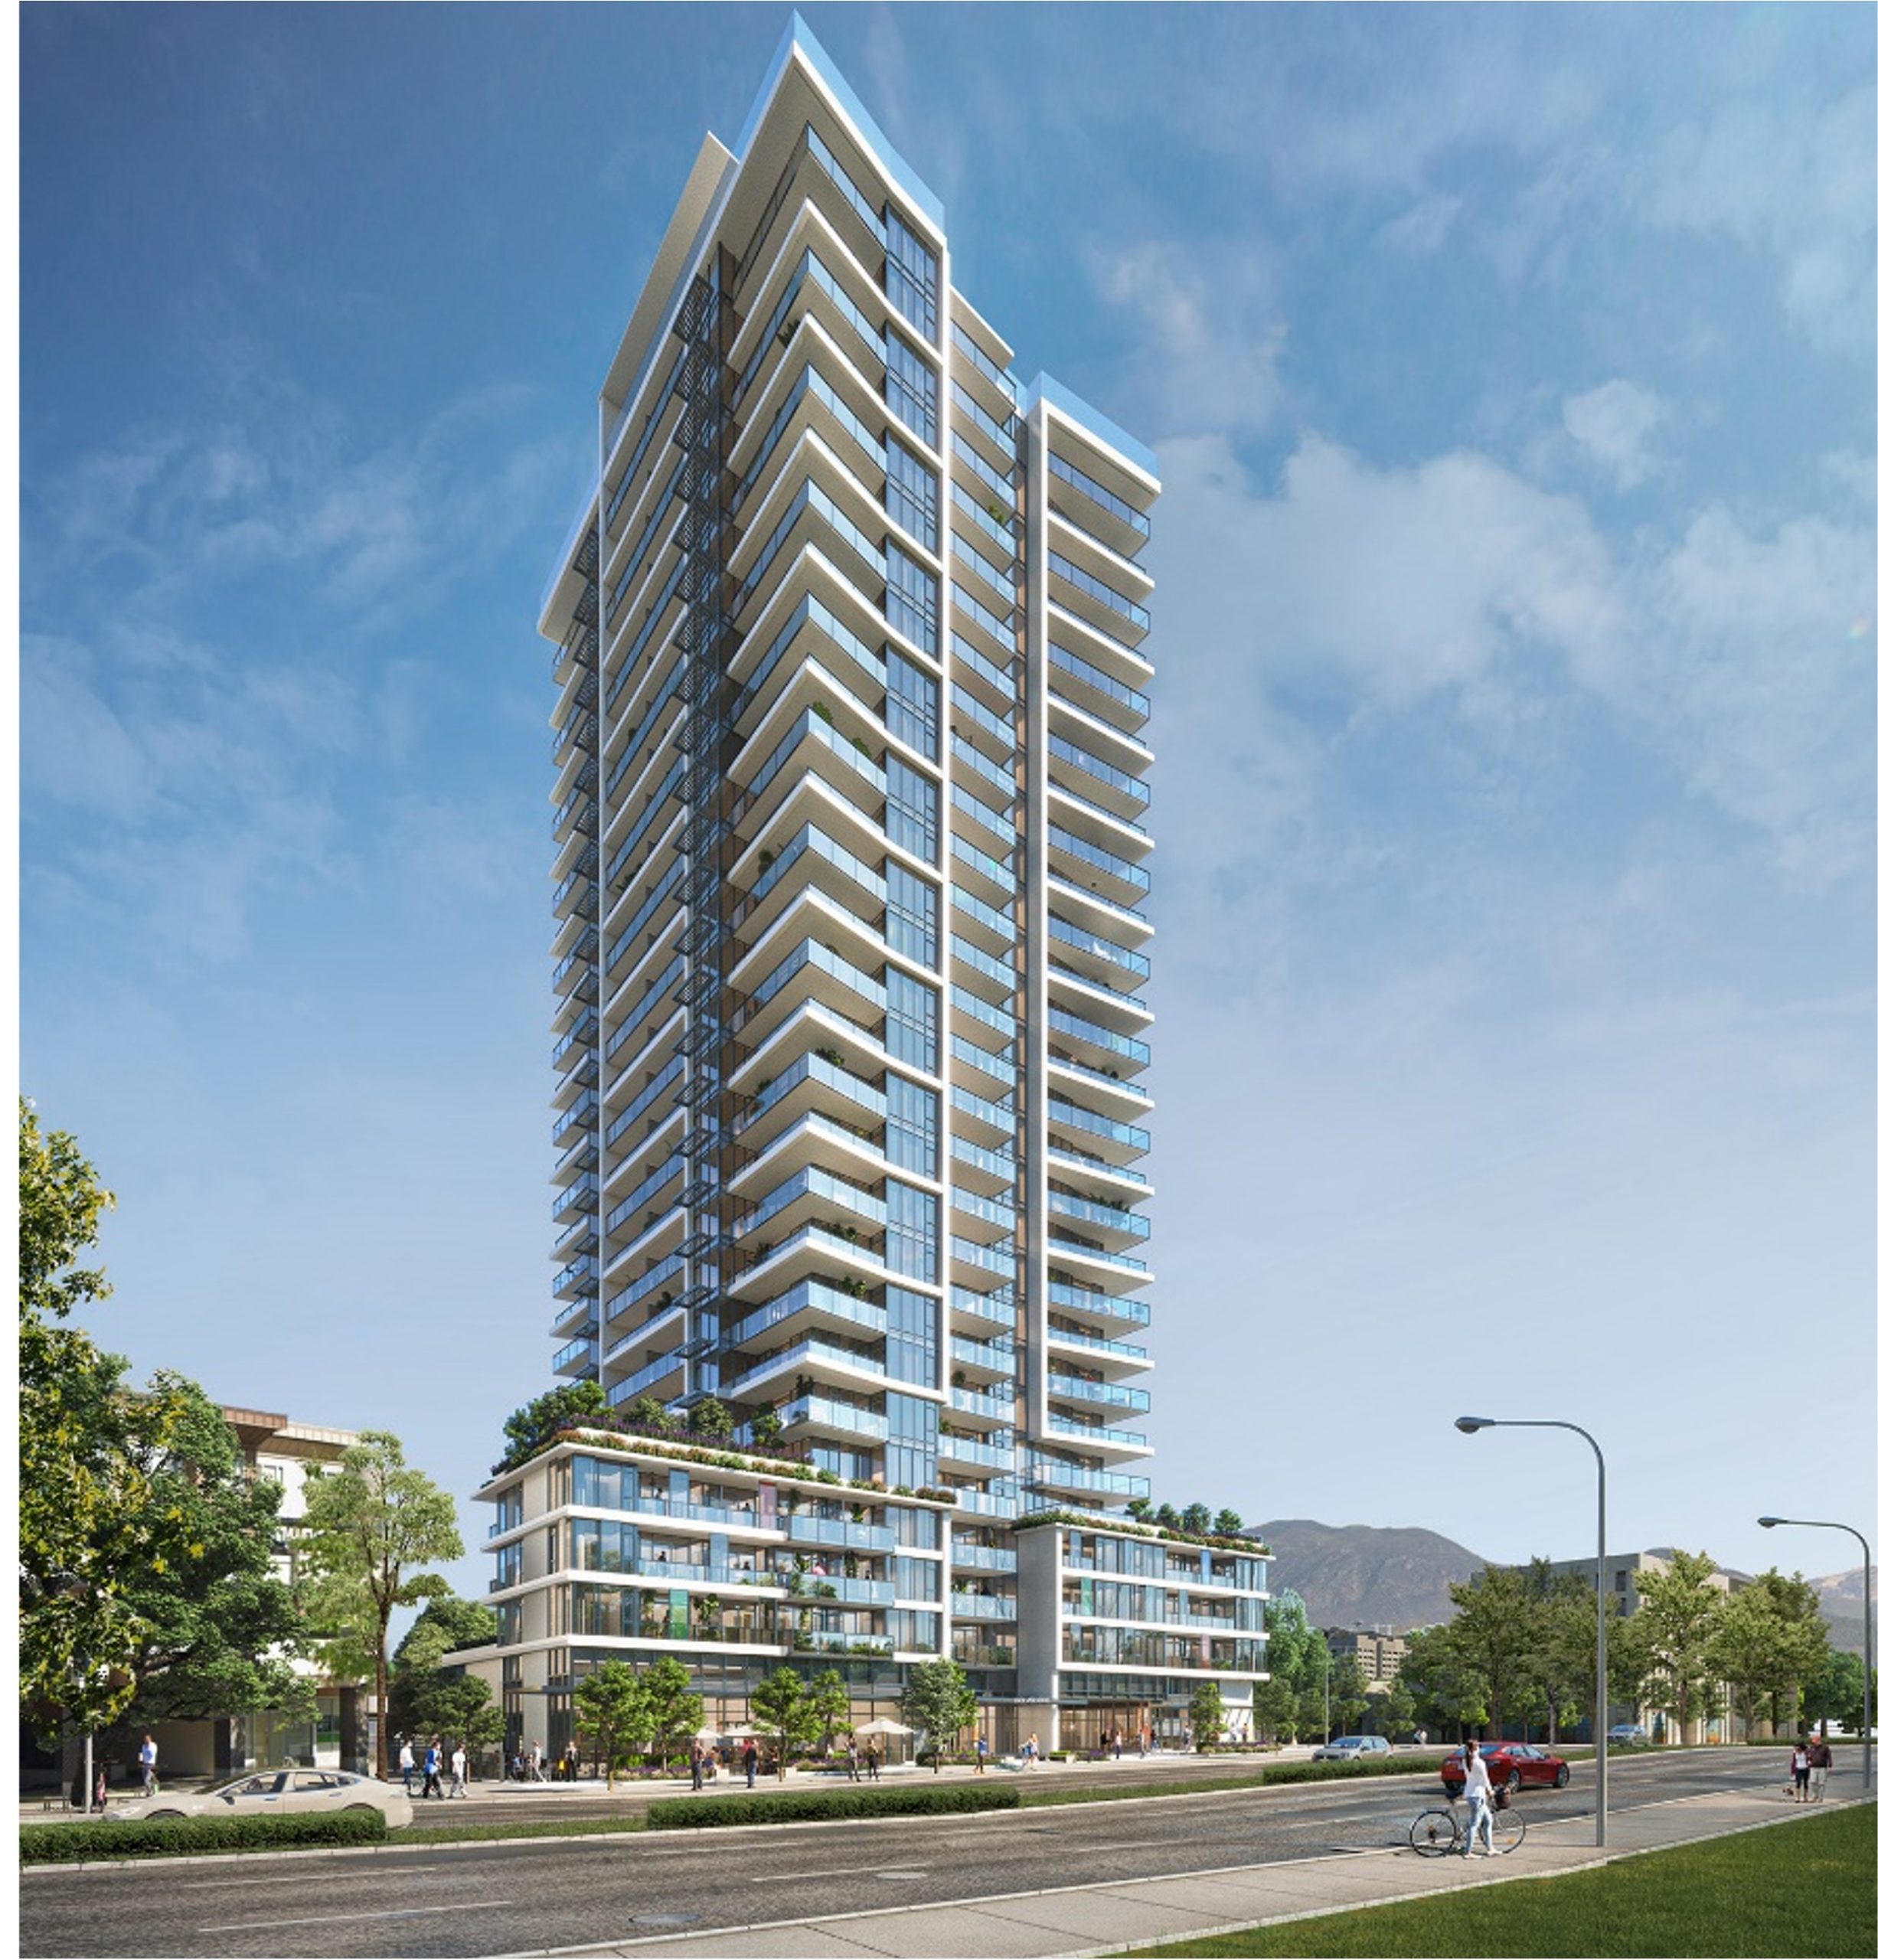 Rendering of Mixed Use High Rise in Surrey